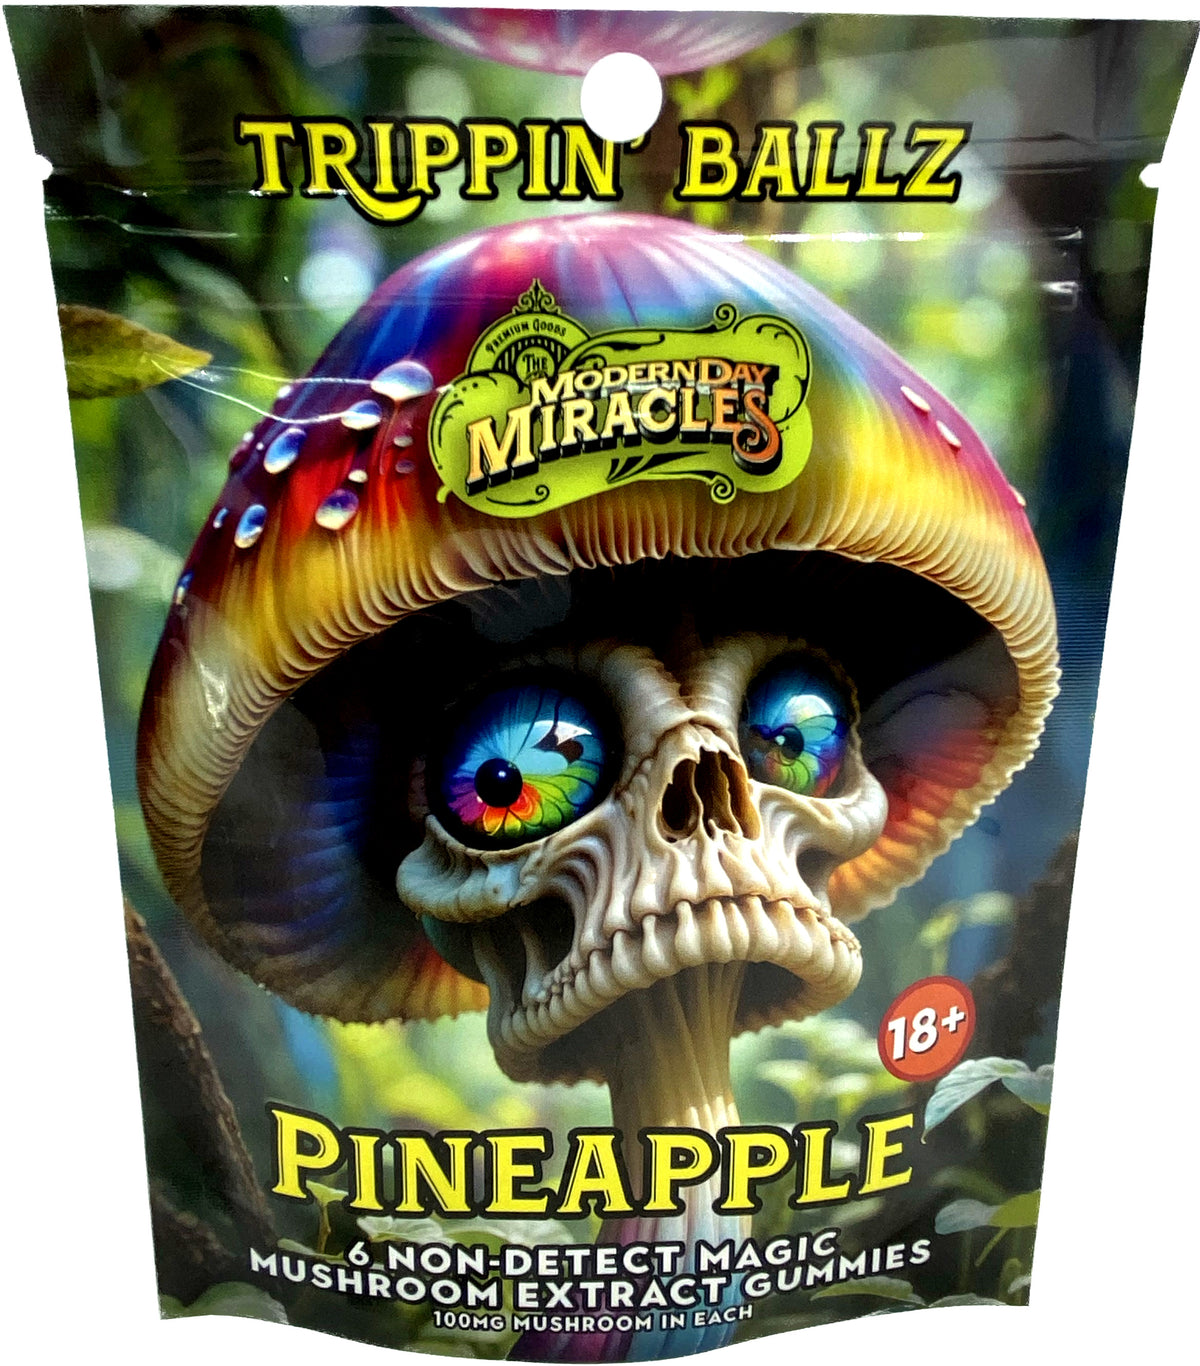 MODERN DAY MIRACLES Trippin' Ballz Non-Detect Magic Mushroom Extract Gummies 100mg 6ct Pineapple Flavored